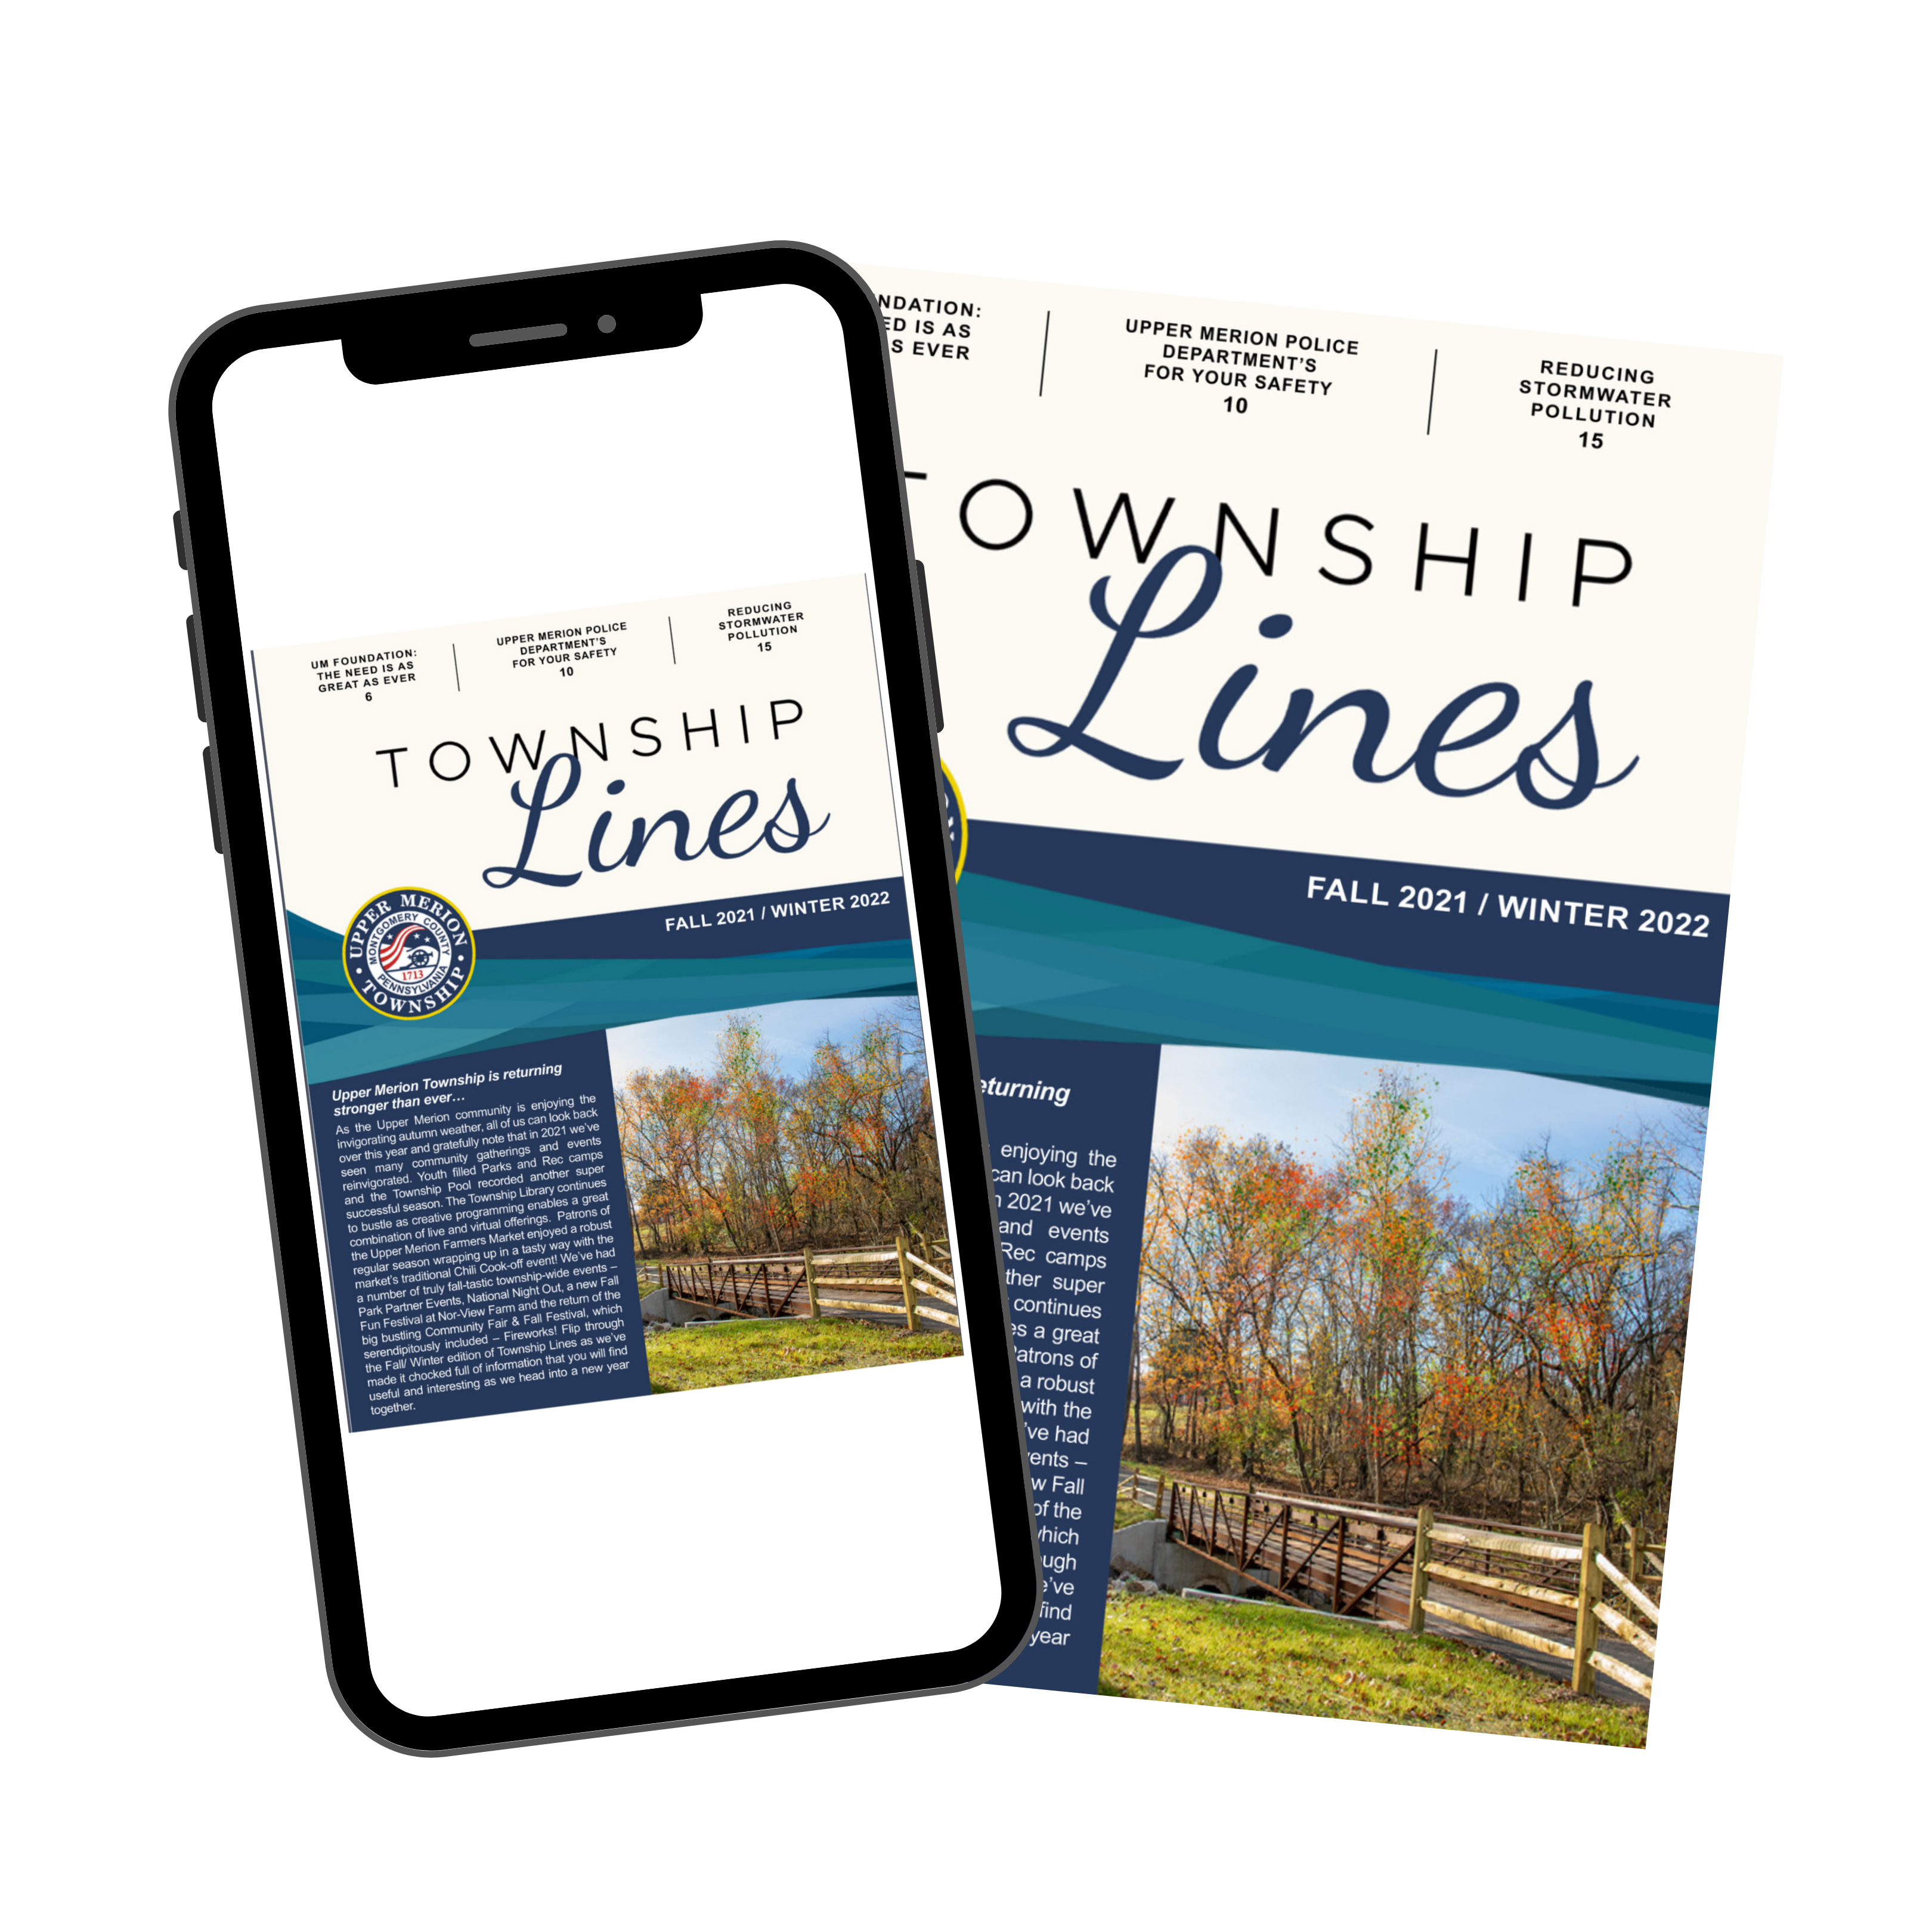 Latest Edition of Township Lines has Arrived